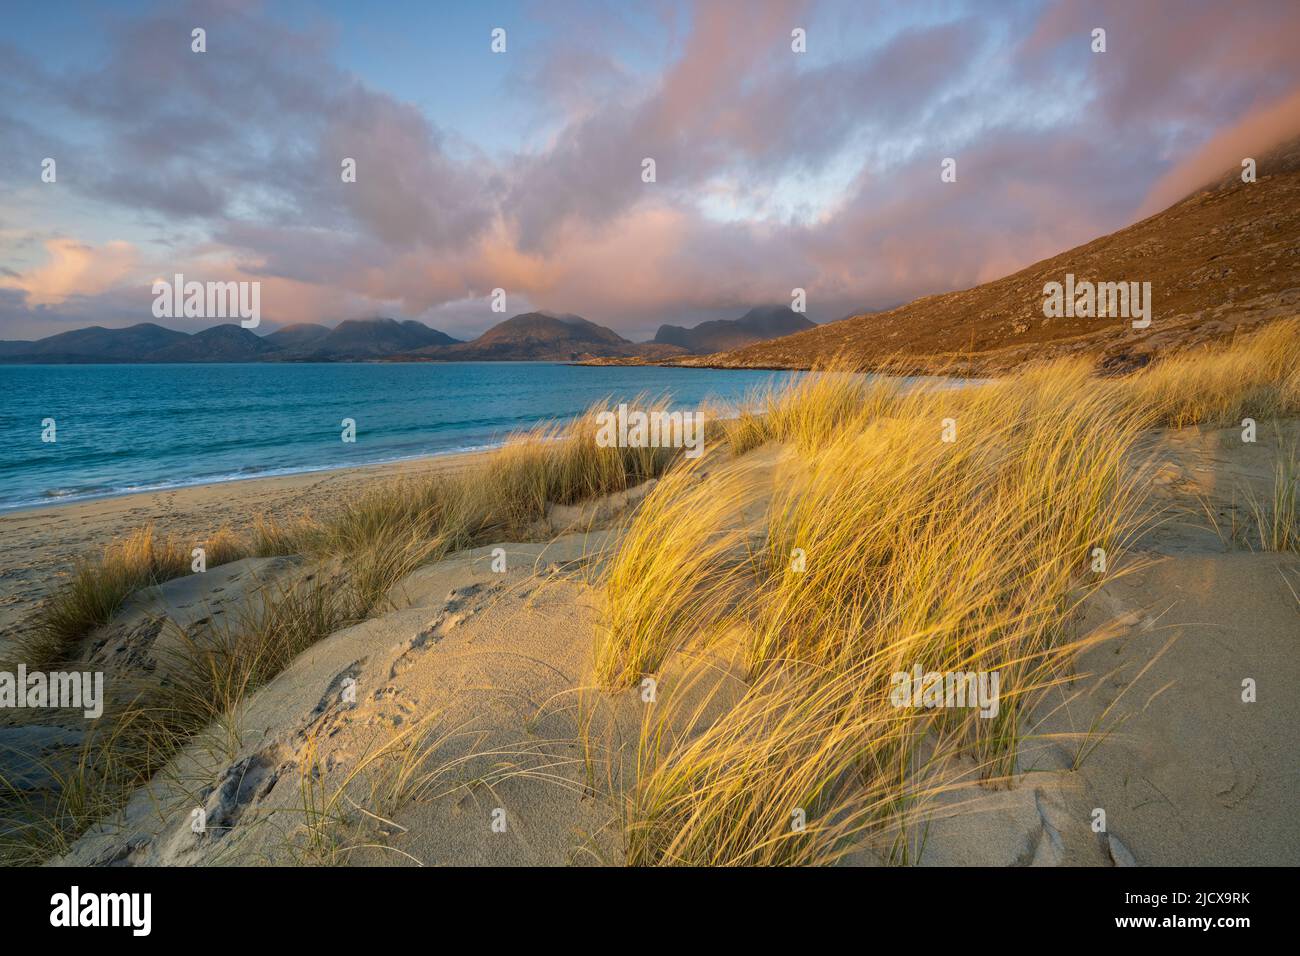 Marram grass and sand dunes on Luskentyre Beach, looking towards North Harris Forest Hills, South Harris, Outer Hebrides, Scotland, United Kingdom Stock Photo